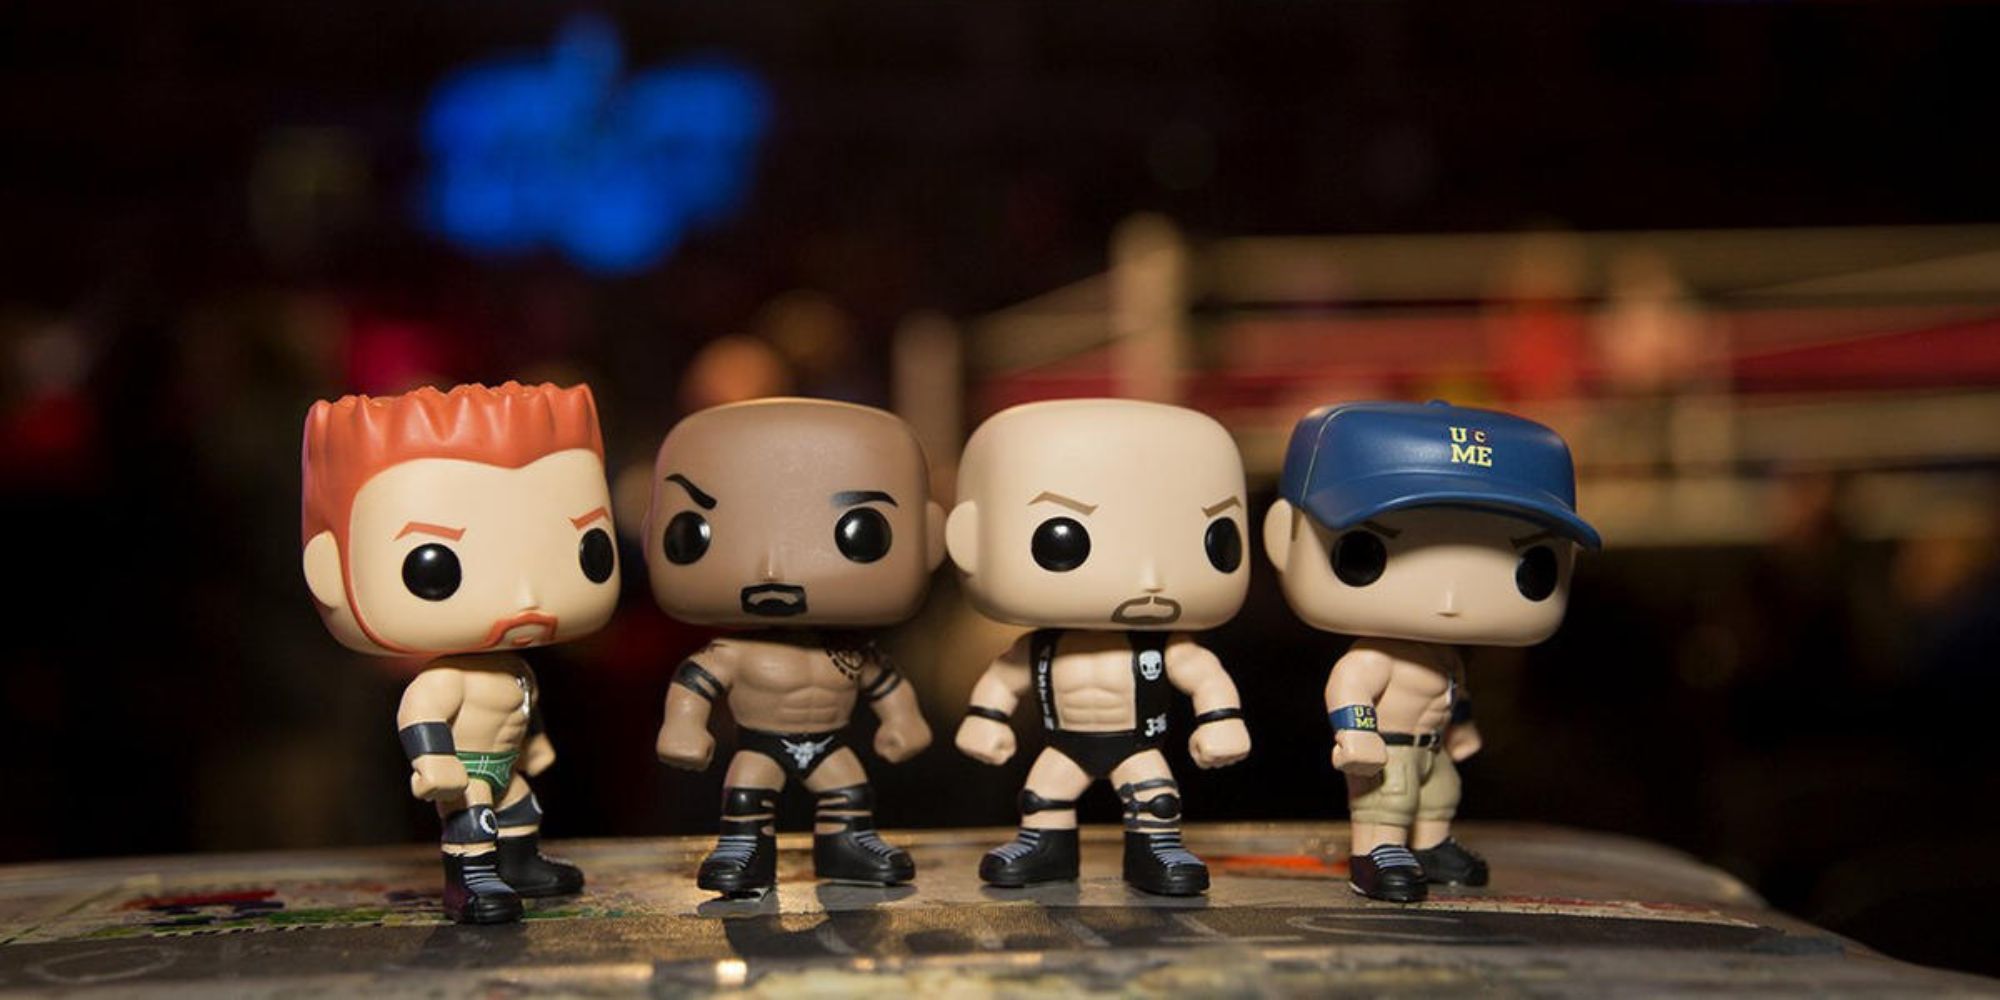 Pop' Culture: The Incredible Rise of Funko Pop! Figures